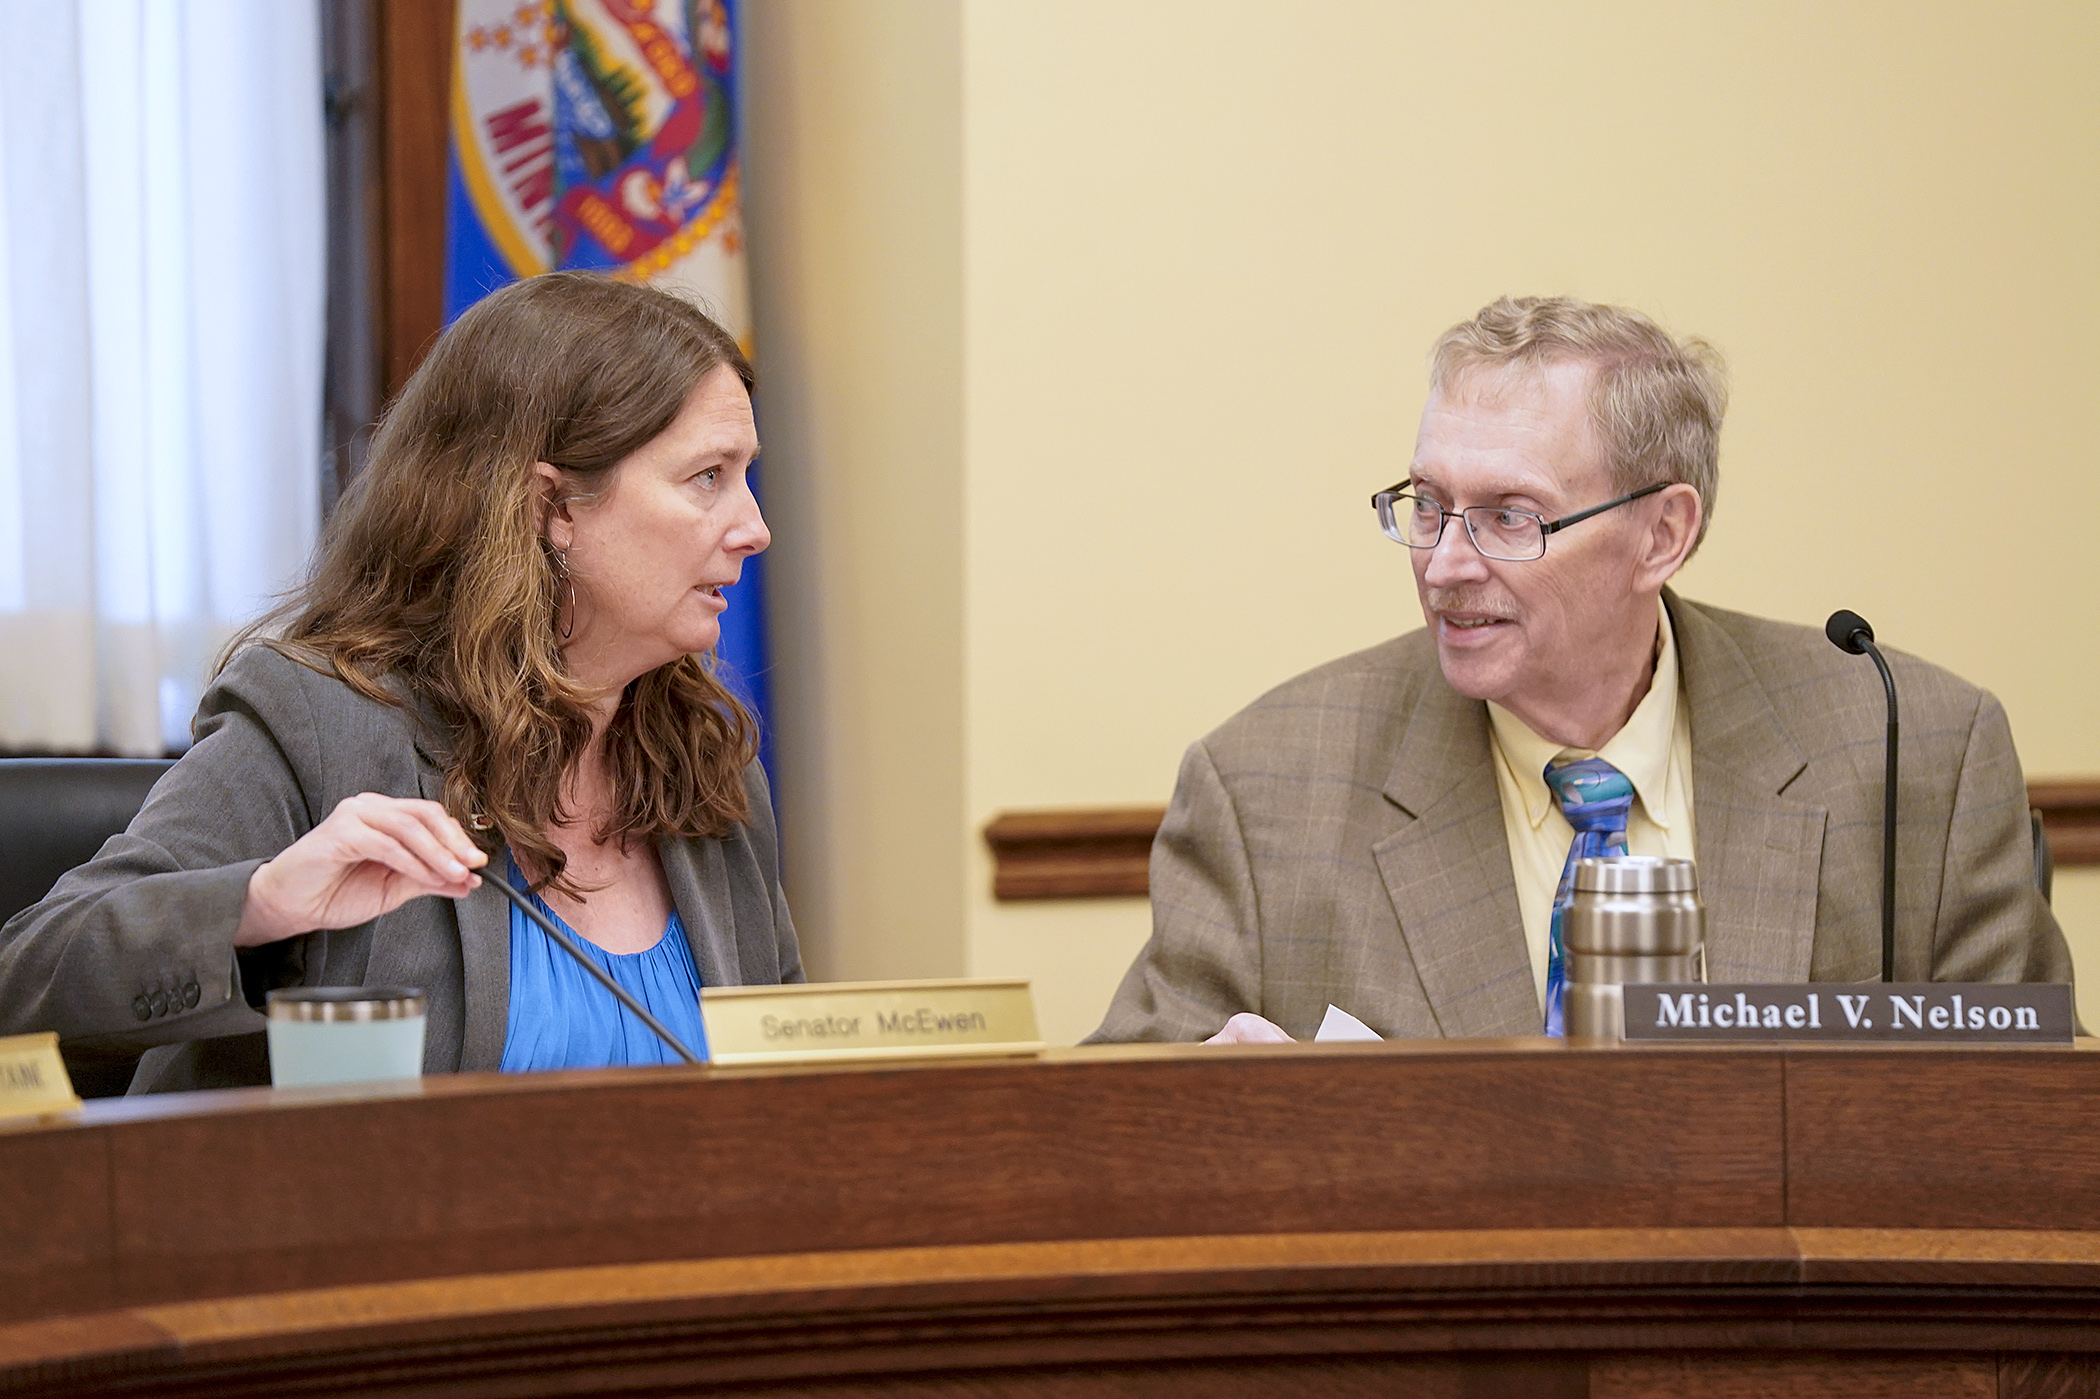 Co-chairs of the labor and industry policy bill conference committee — Sen. Jennifer McEwen and Rep. Michael Nelson — confer during the April 25 meeting. (Photo by Michele Jokinen)